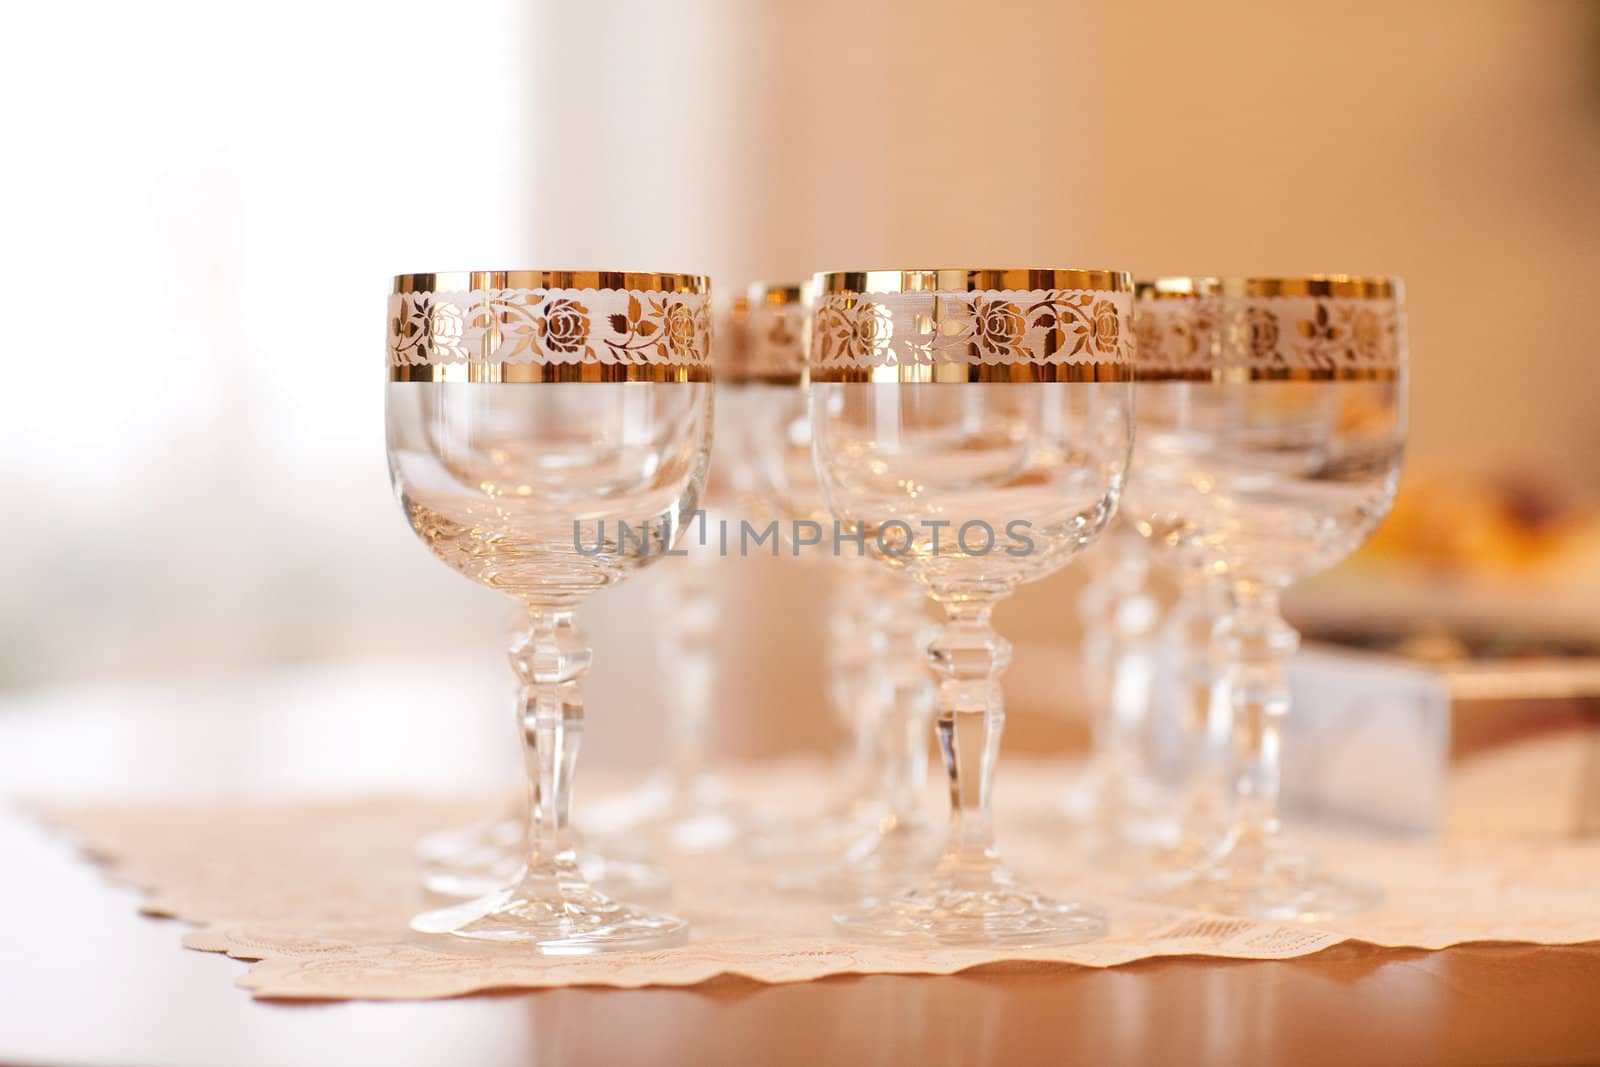 holiday glasses on the table